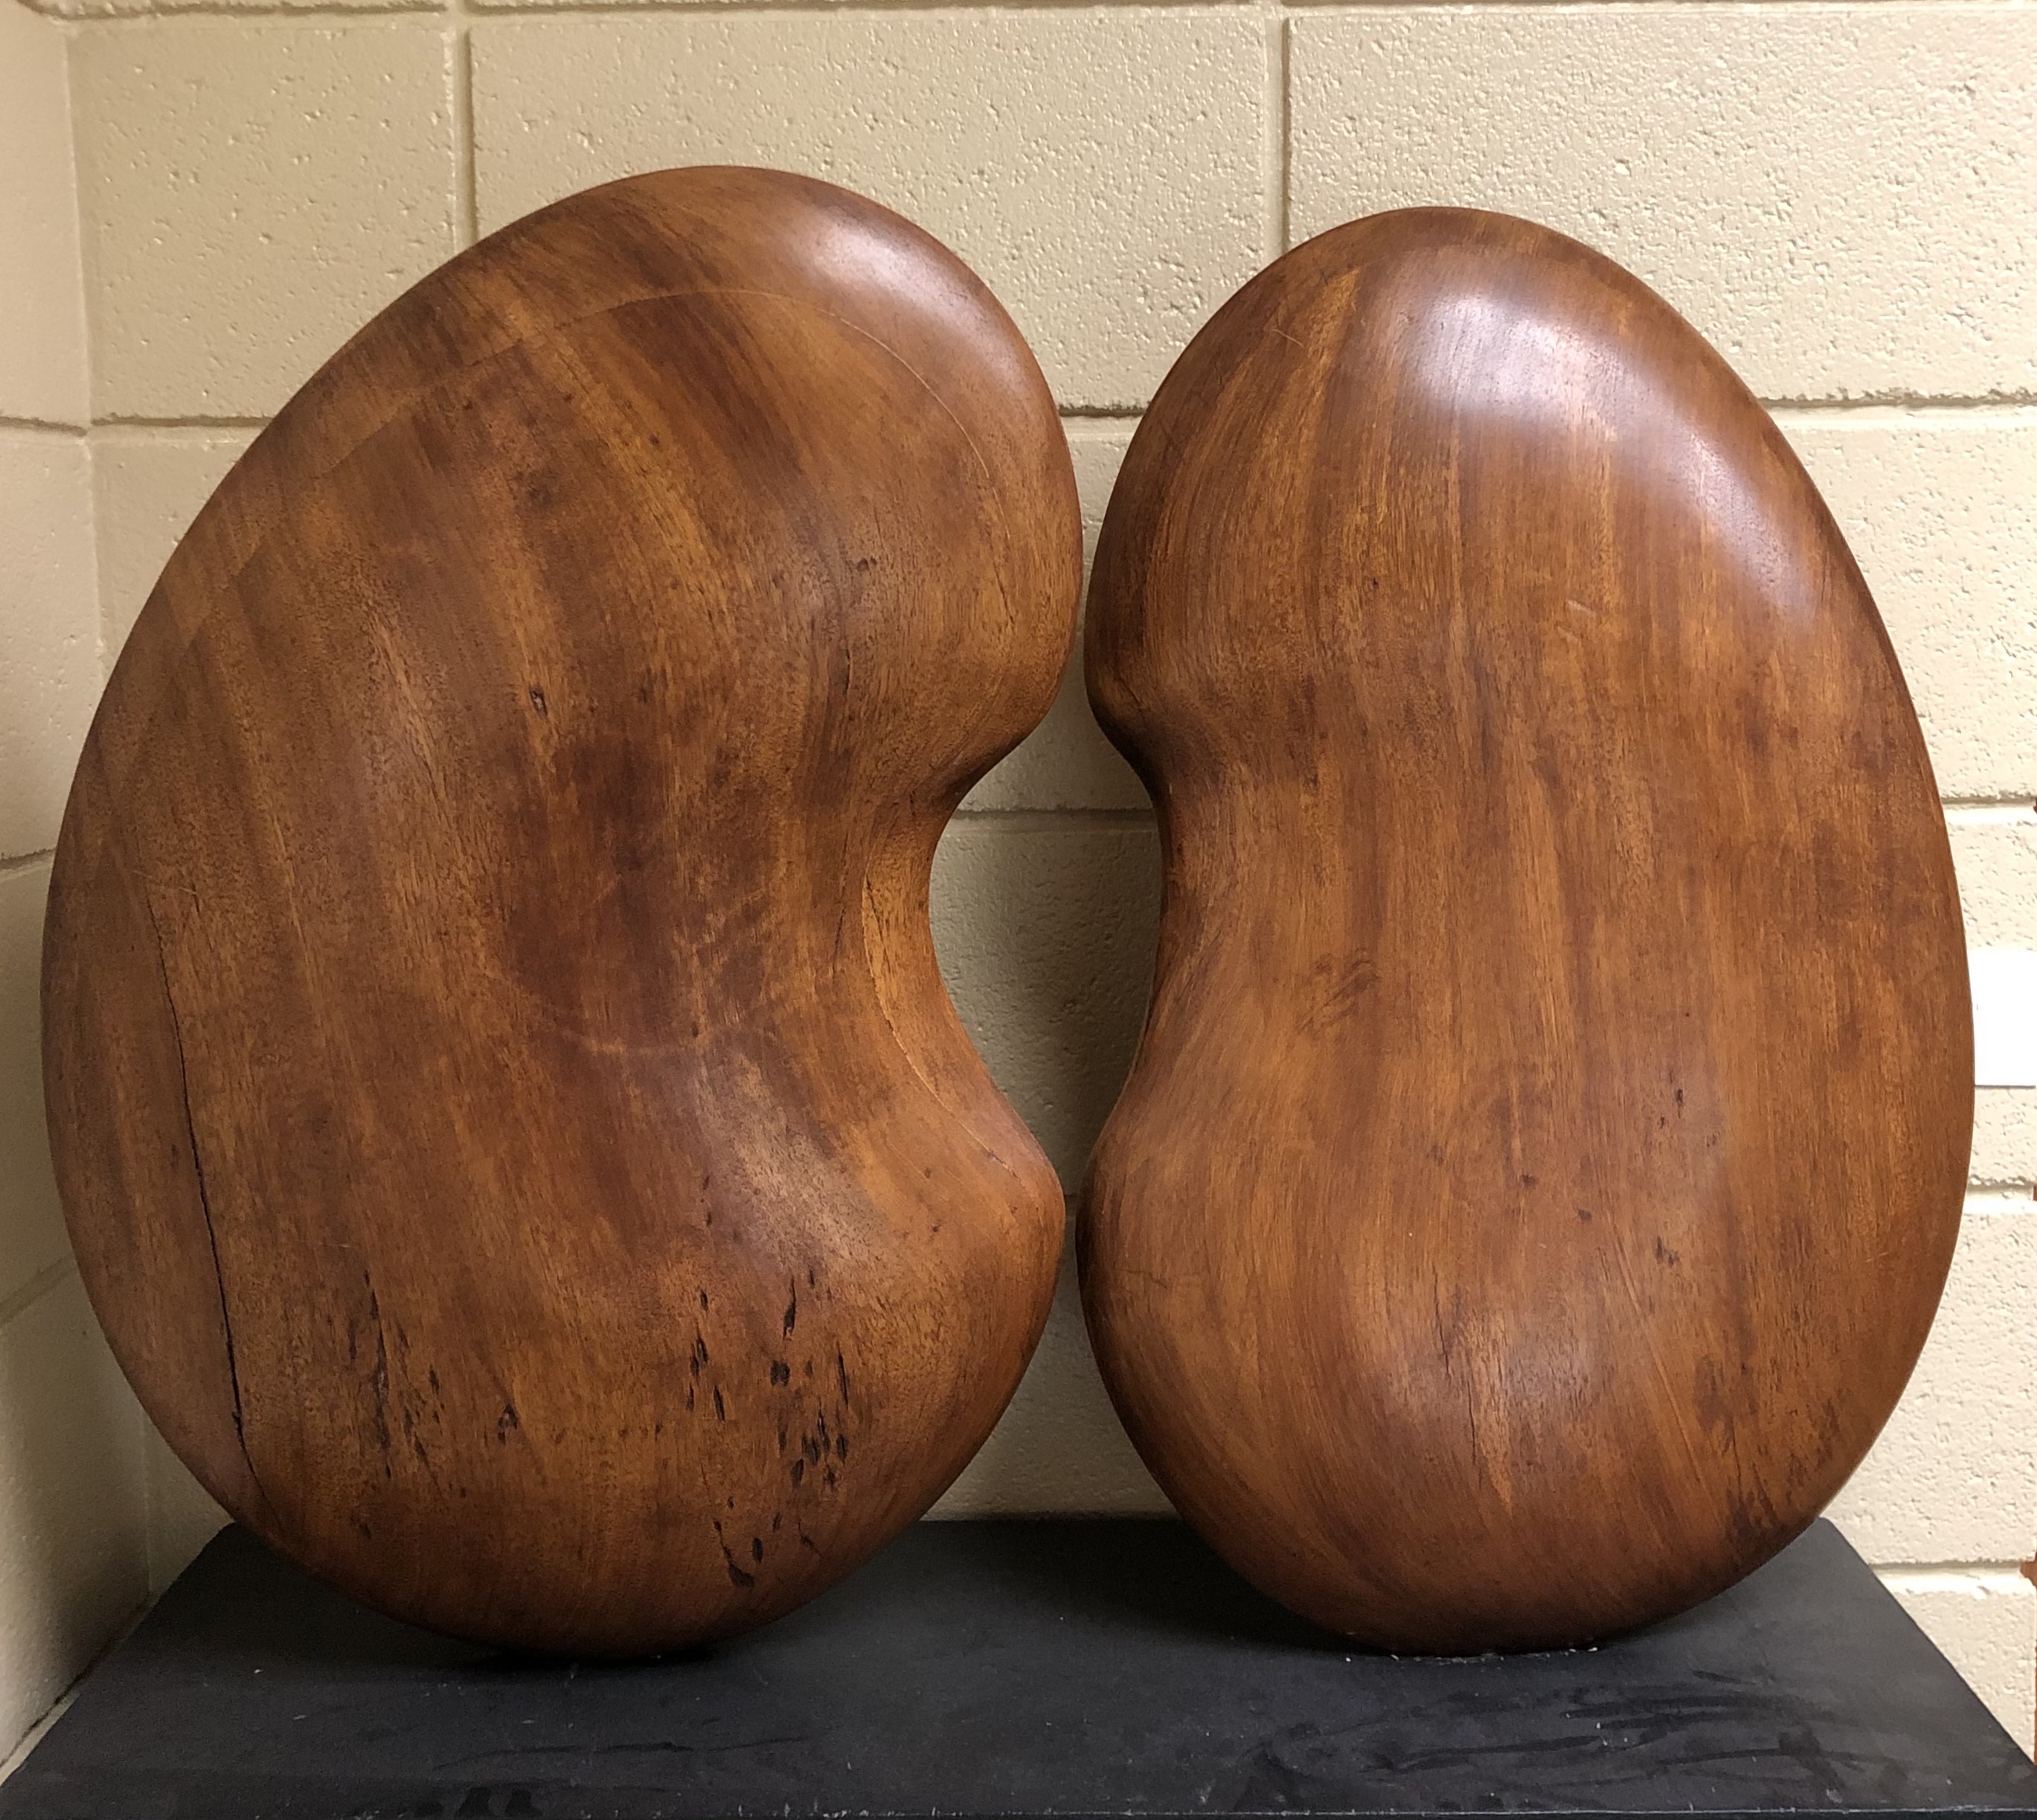 This is a wooden sculpture of two bean-like shapes on a black wooden base. The bean-like structures are separated and slightly titled. 